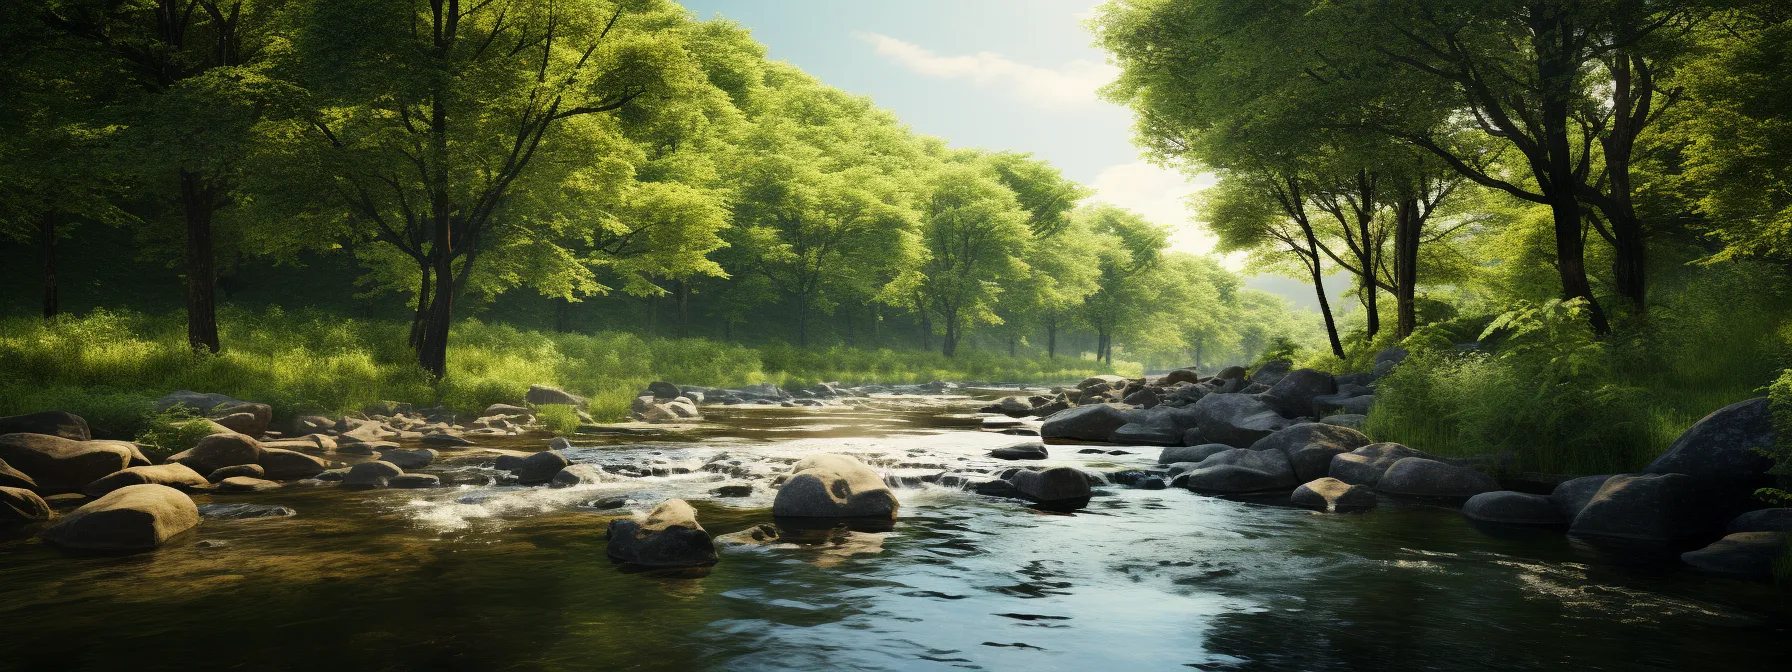 a tranquil landscape with a flowing river surrounded by lush green trees.